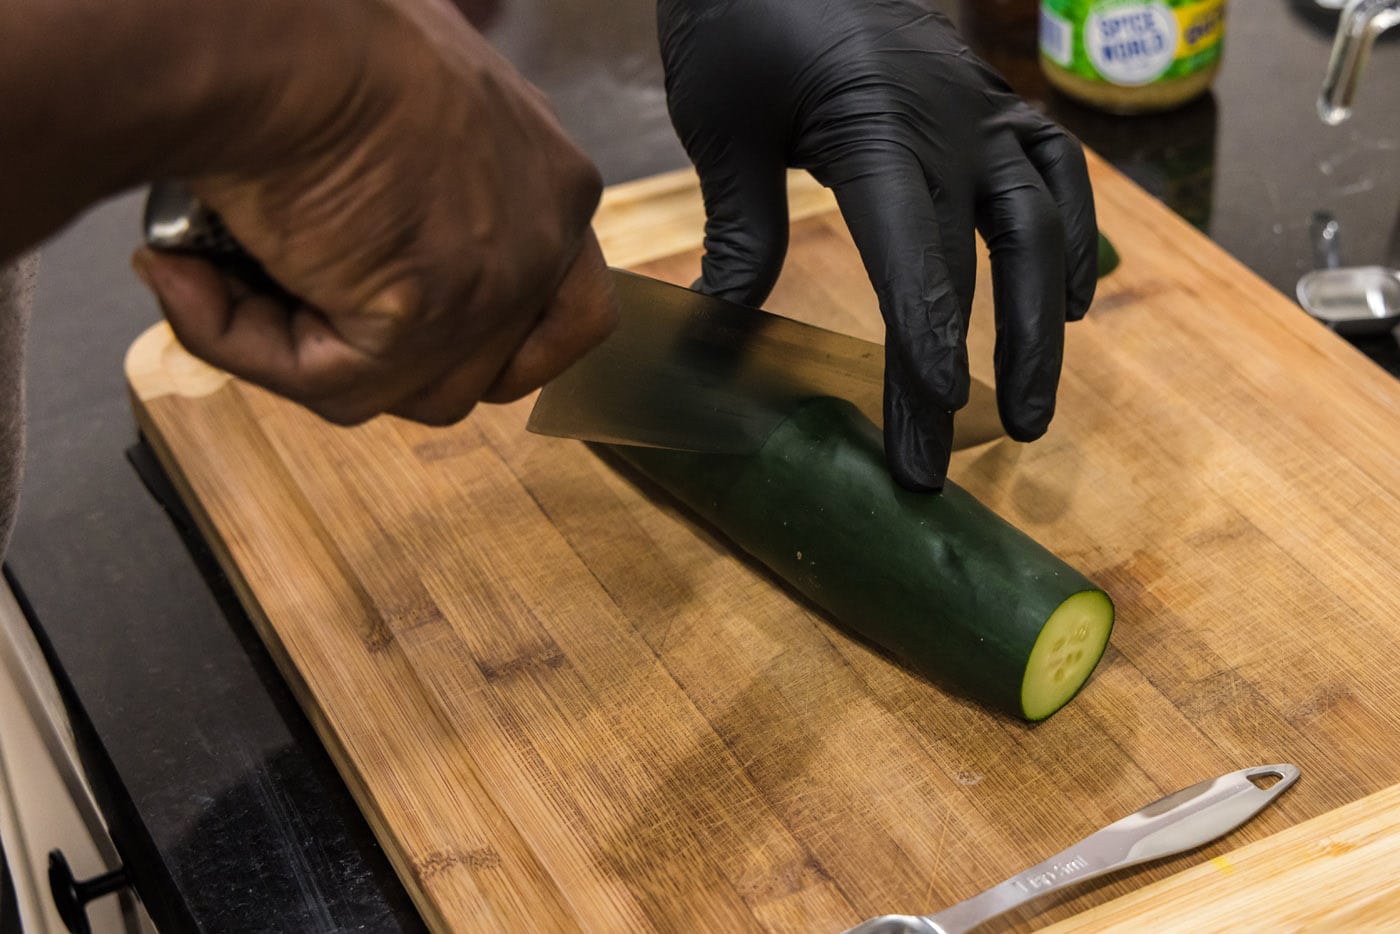 hand slicing cucumber with a knife